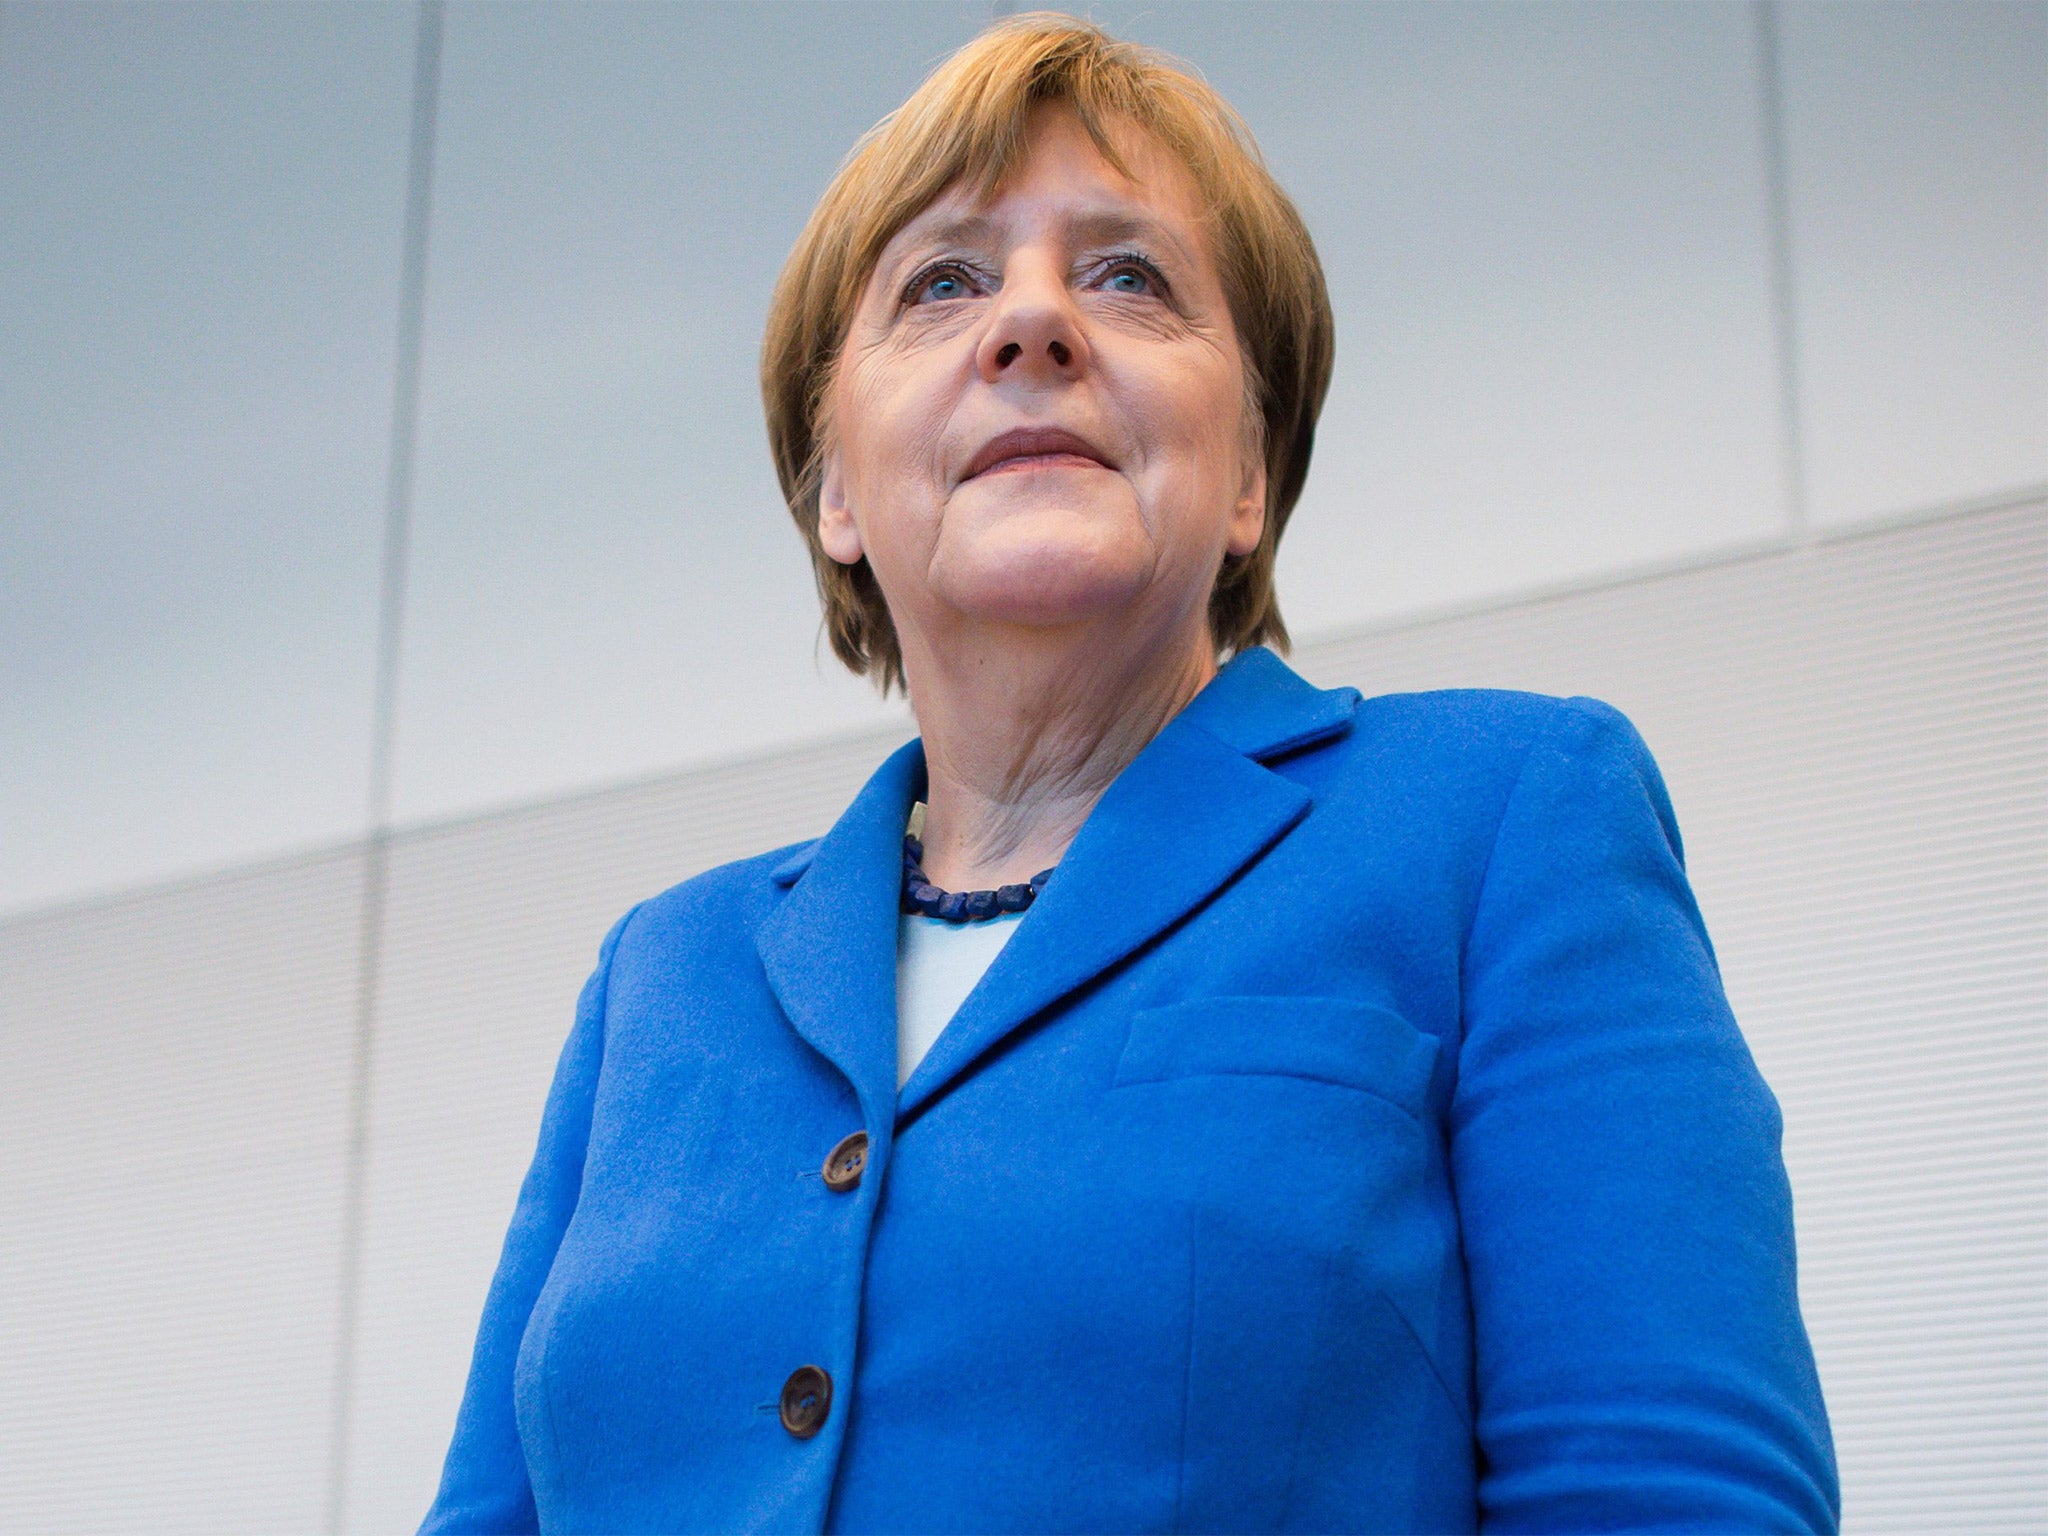 Angela Merkel wants to stick to the formal process as the UK negotiates Brexit